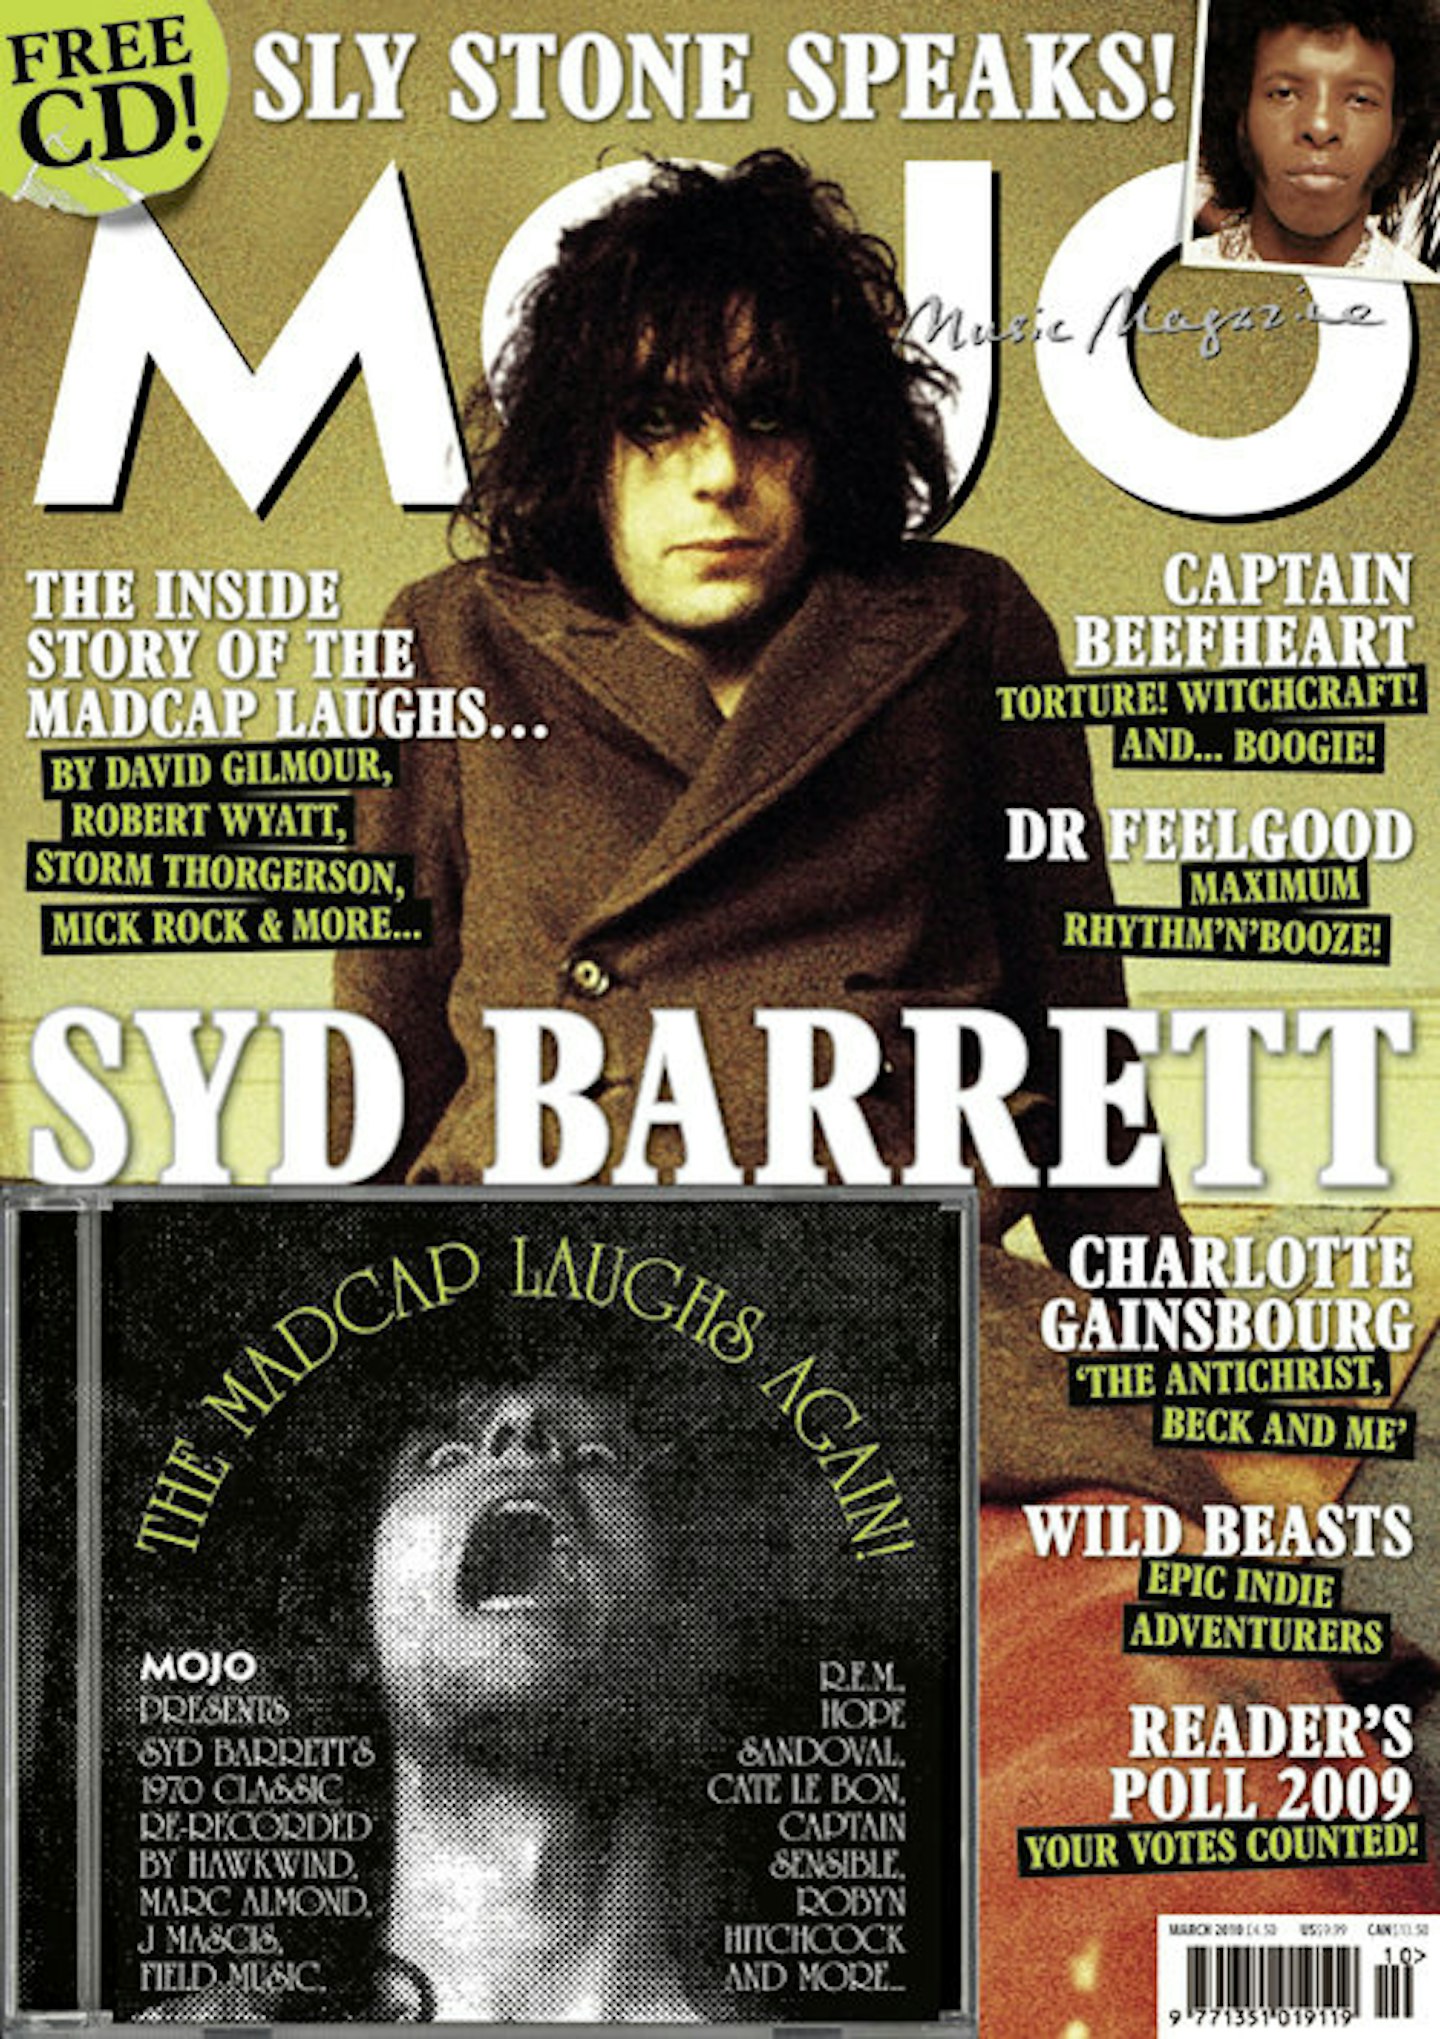 MOJO Issue 196 / March 2010